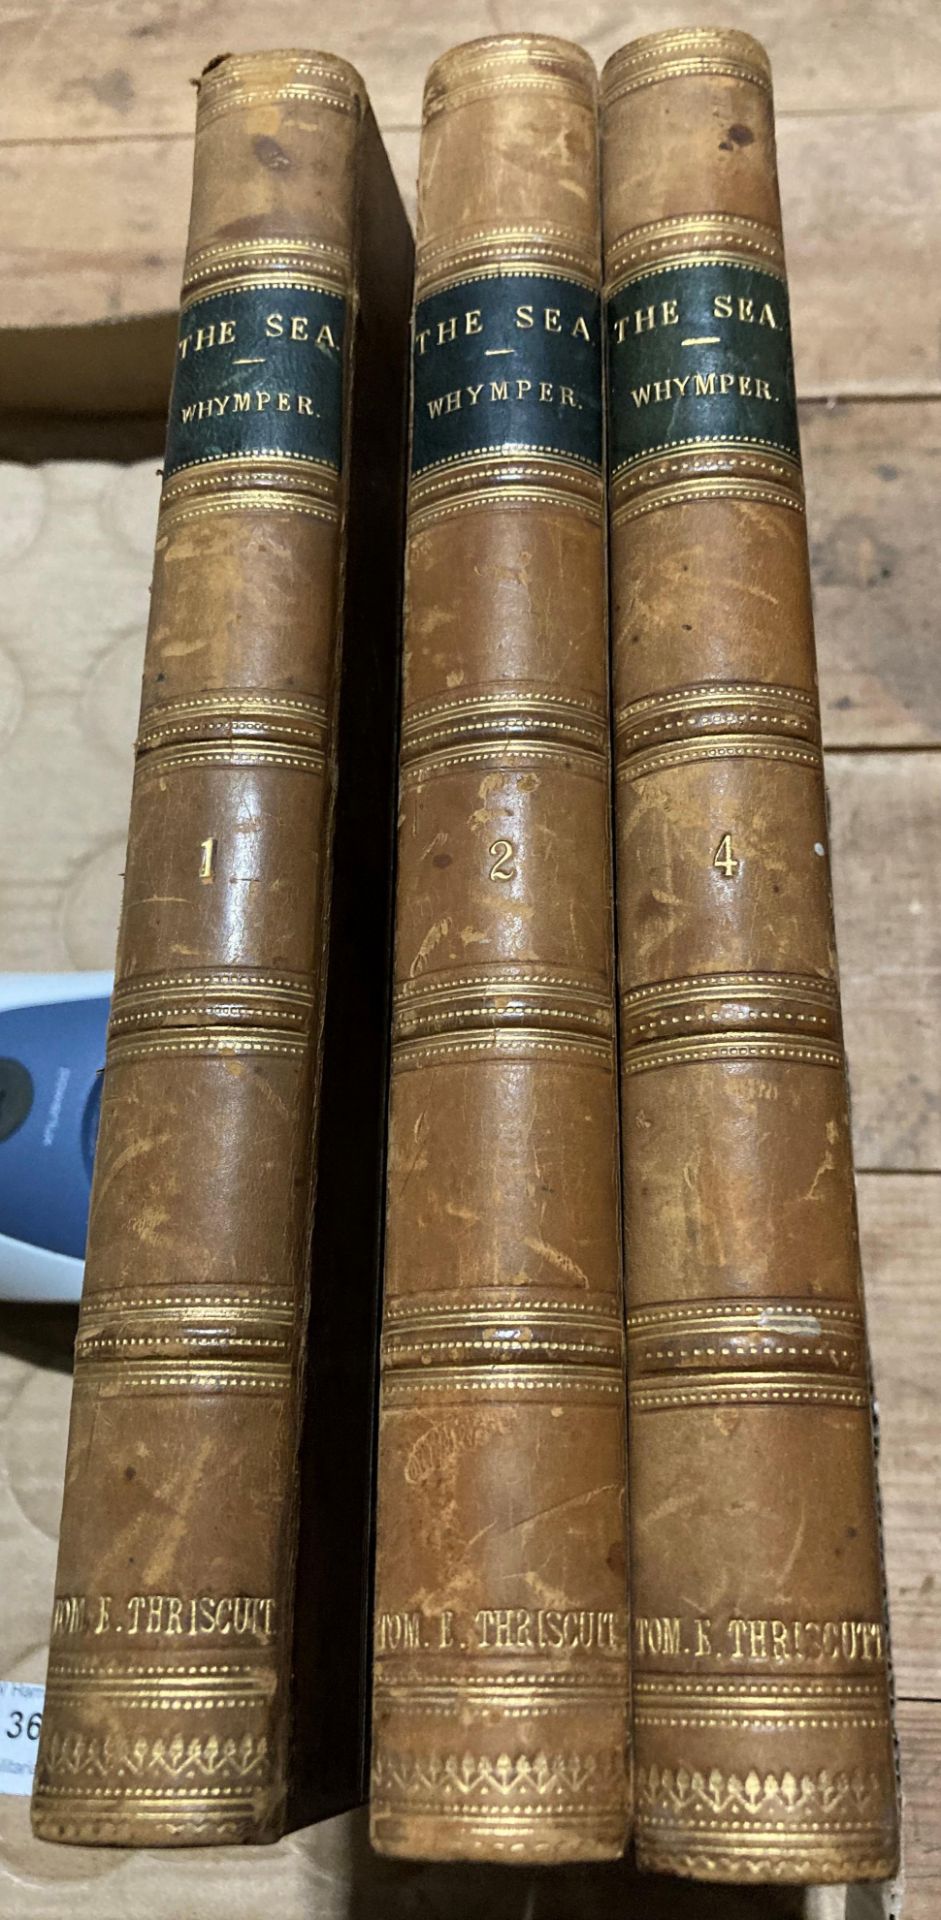 Whymper (three volumes of four) 'The Sea' - 1,